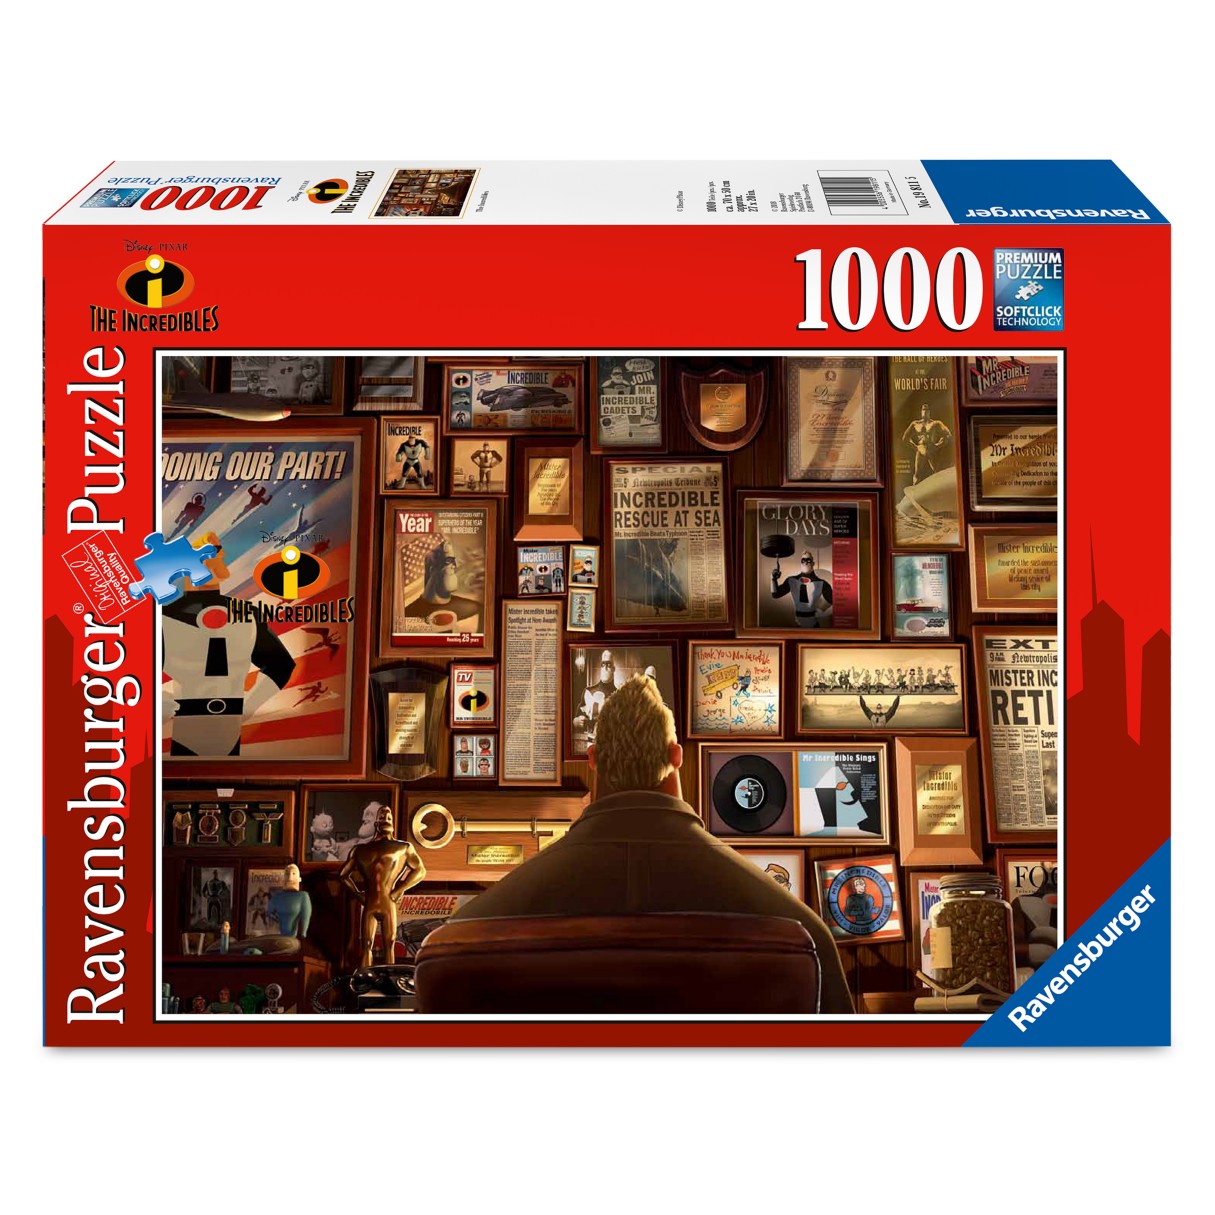 The Incredibles Puzzle by Ravensburger